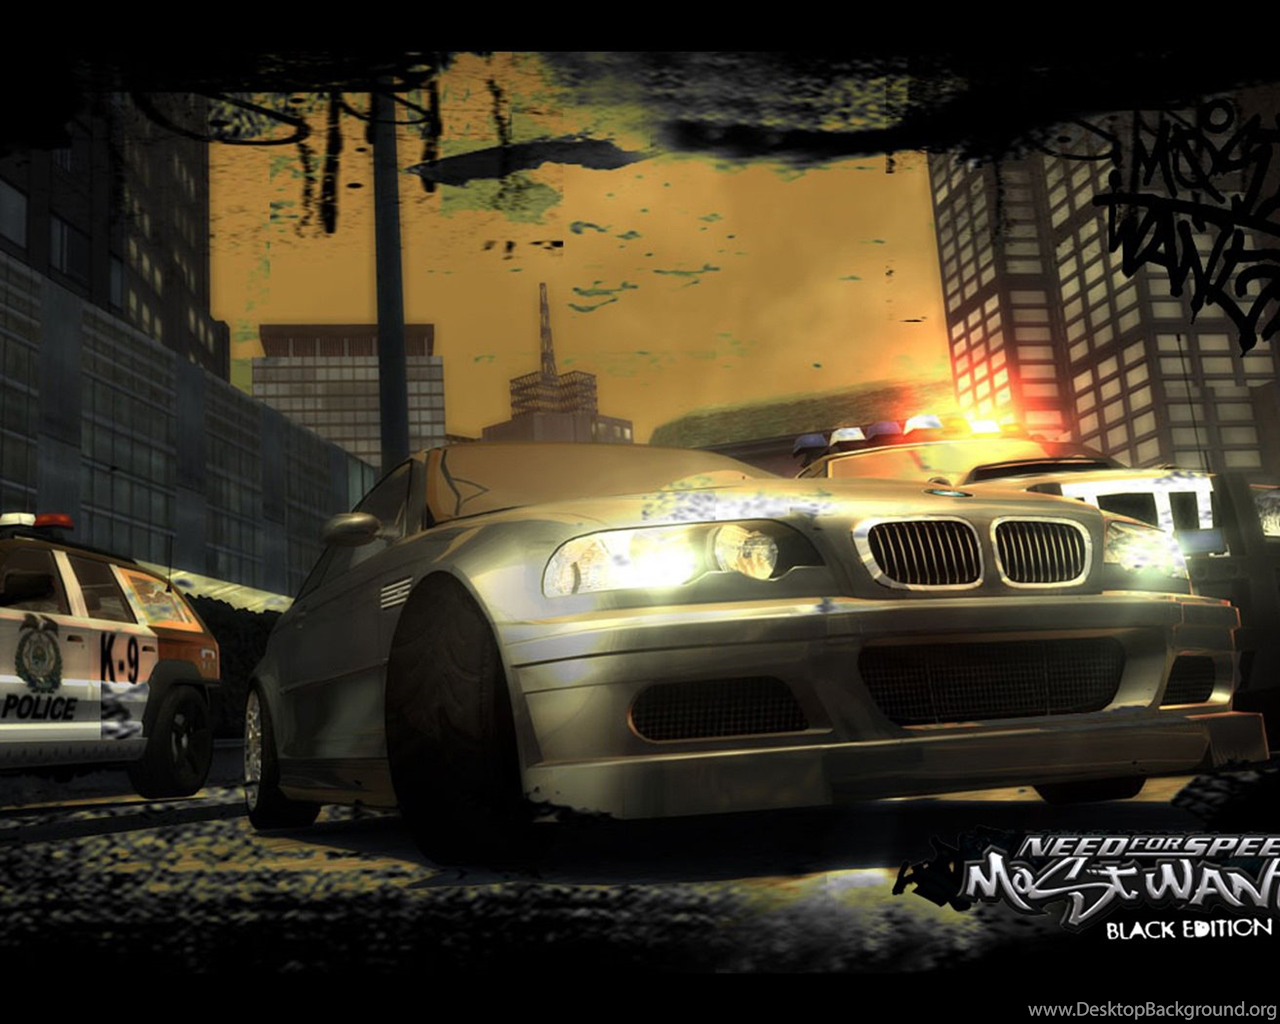 Песни из игры need for. NFS most wanted 2005 мост. NFS most wanted 2005 БМВ. Нфс МВ 2005. NFS MW 2005 BMW.